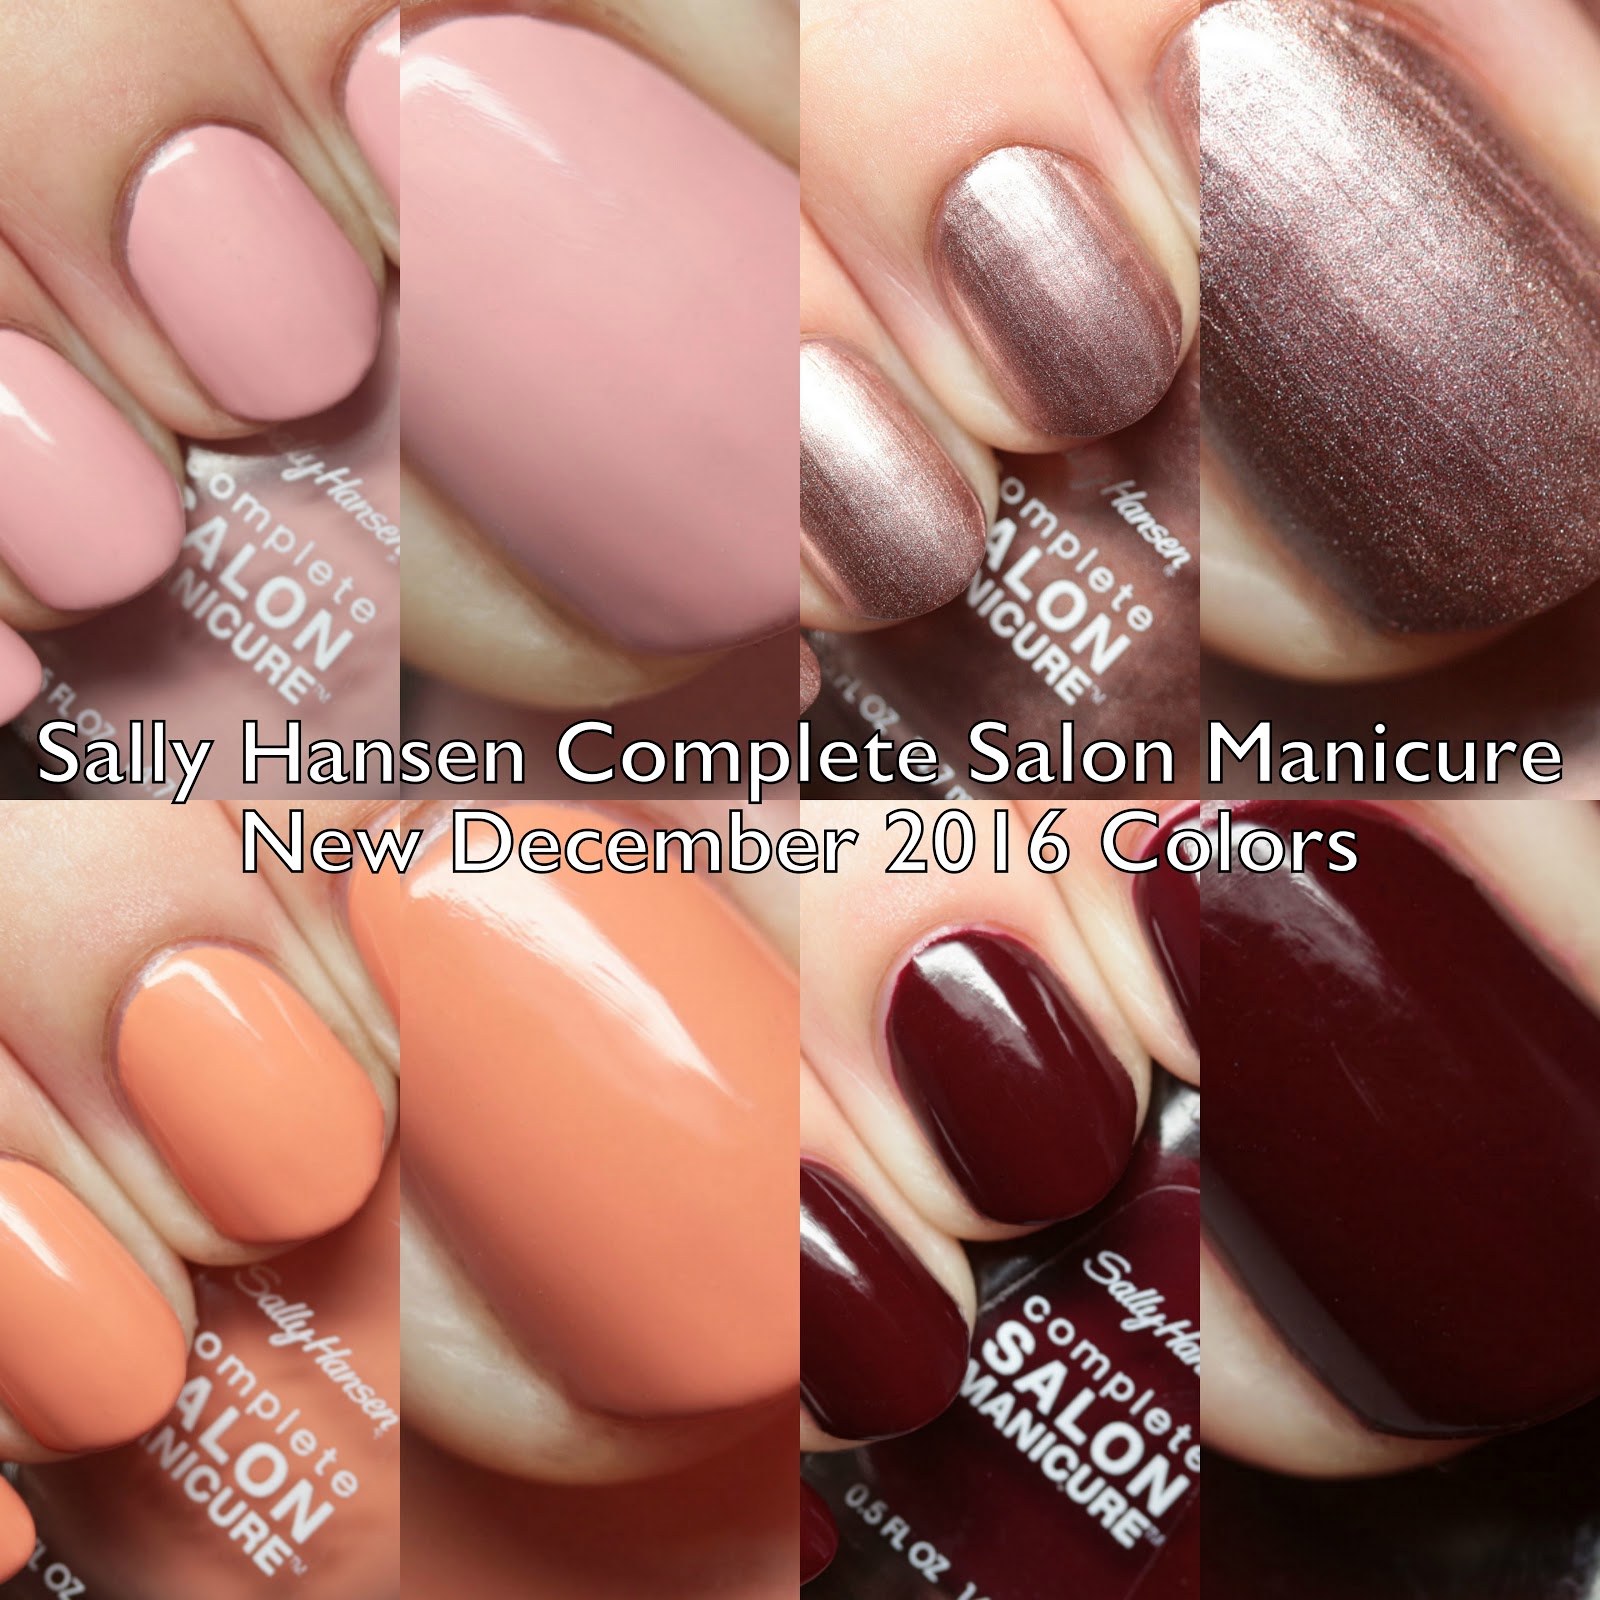 The Polished Hippy: Sally Hansen Complete Salon Manicure New Winter 2016  Colors Swatches and Review